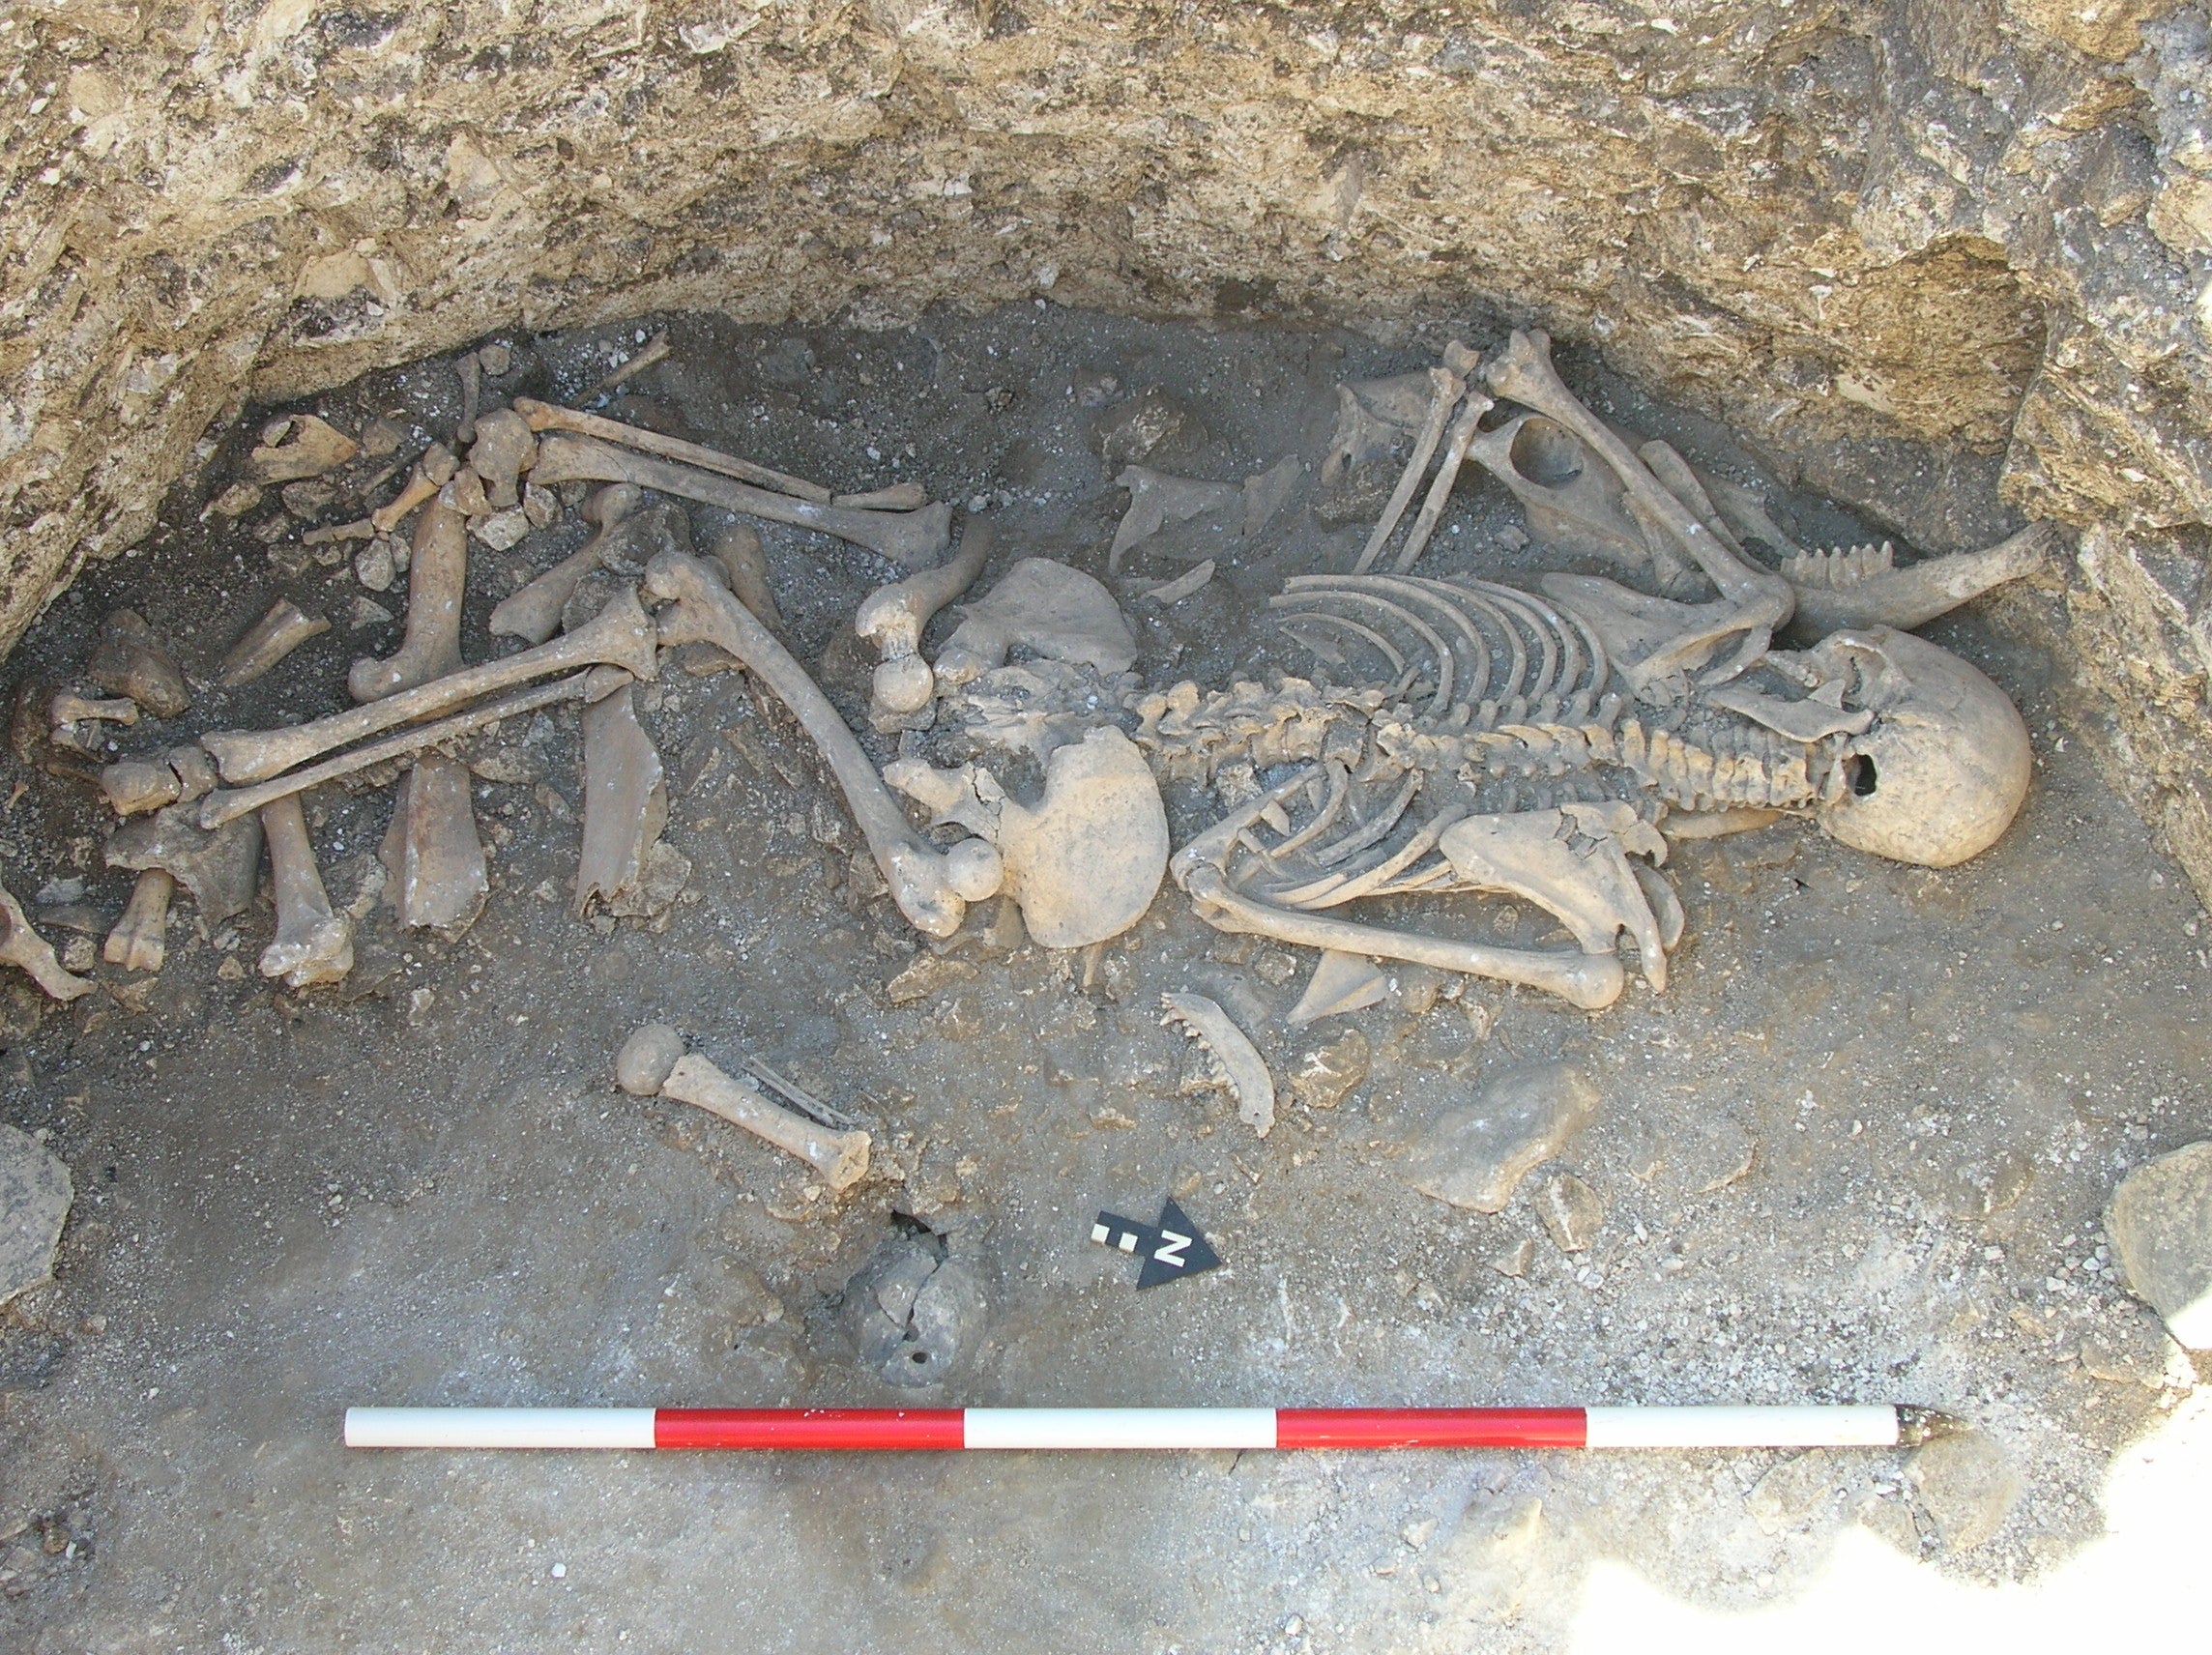 Remains of a woman who was killed by a stab wound to the neck as well as damage to a rib, possibly inflicted through violence, found during excavations of pre-historic settlement dating back 2,000 years at Winterborne Kingston in central Dorset